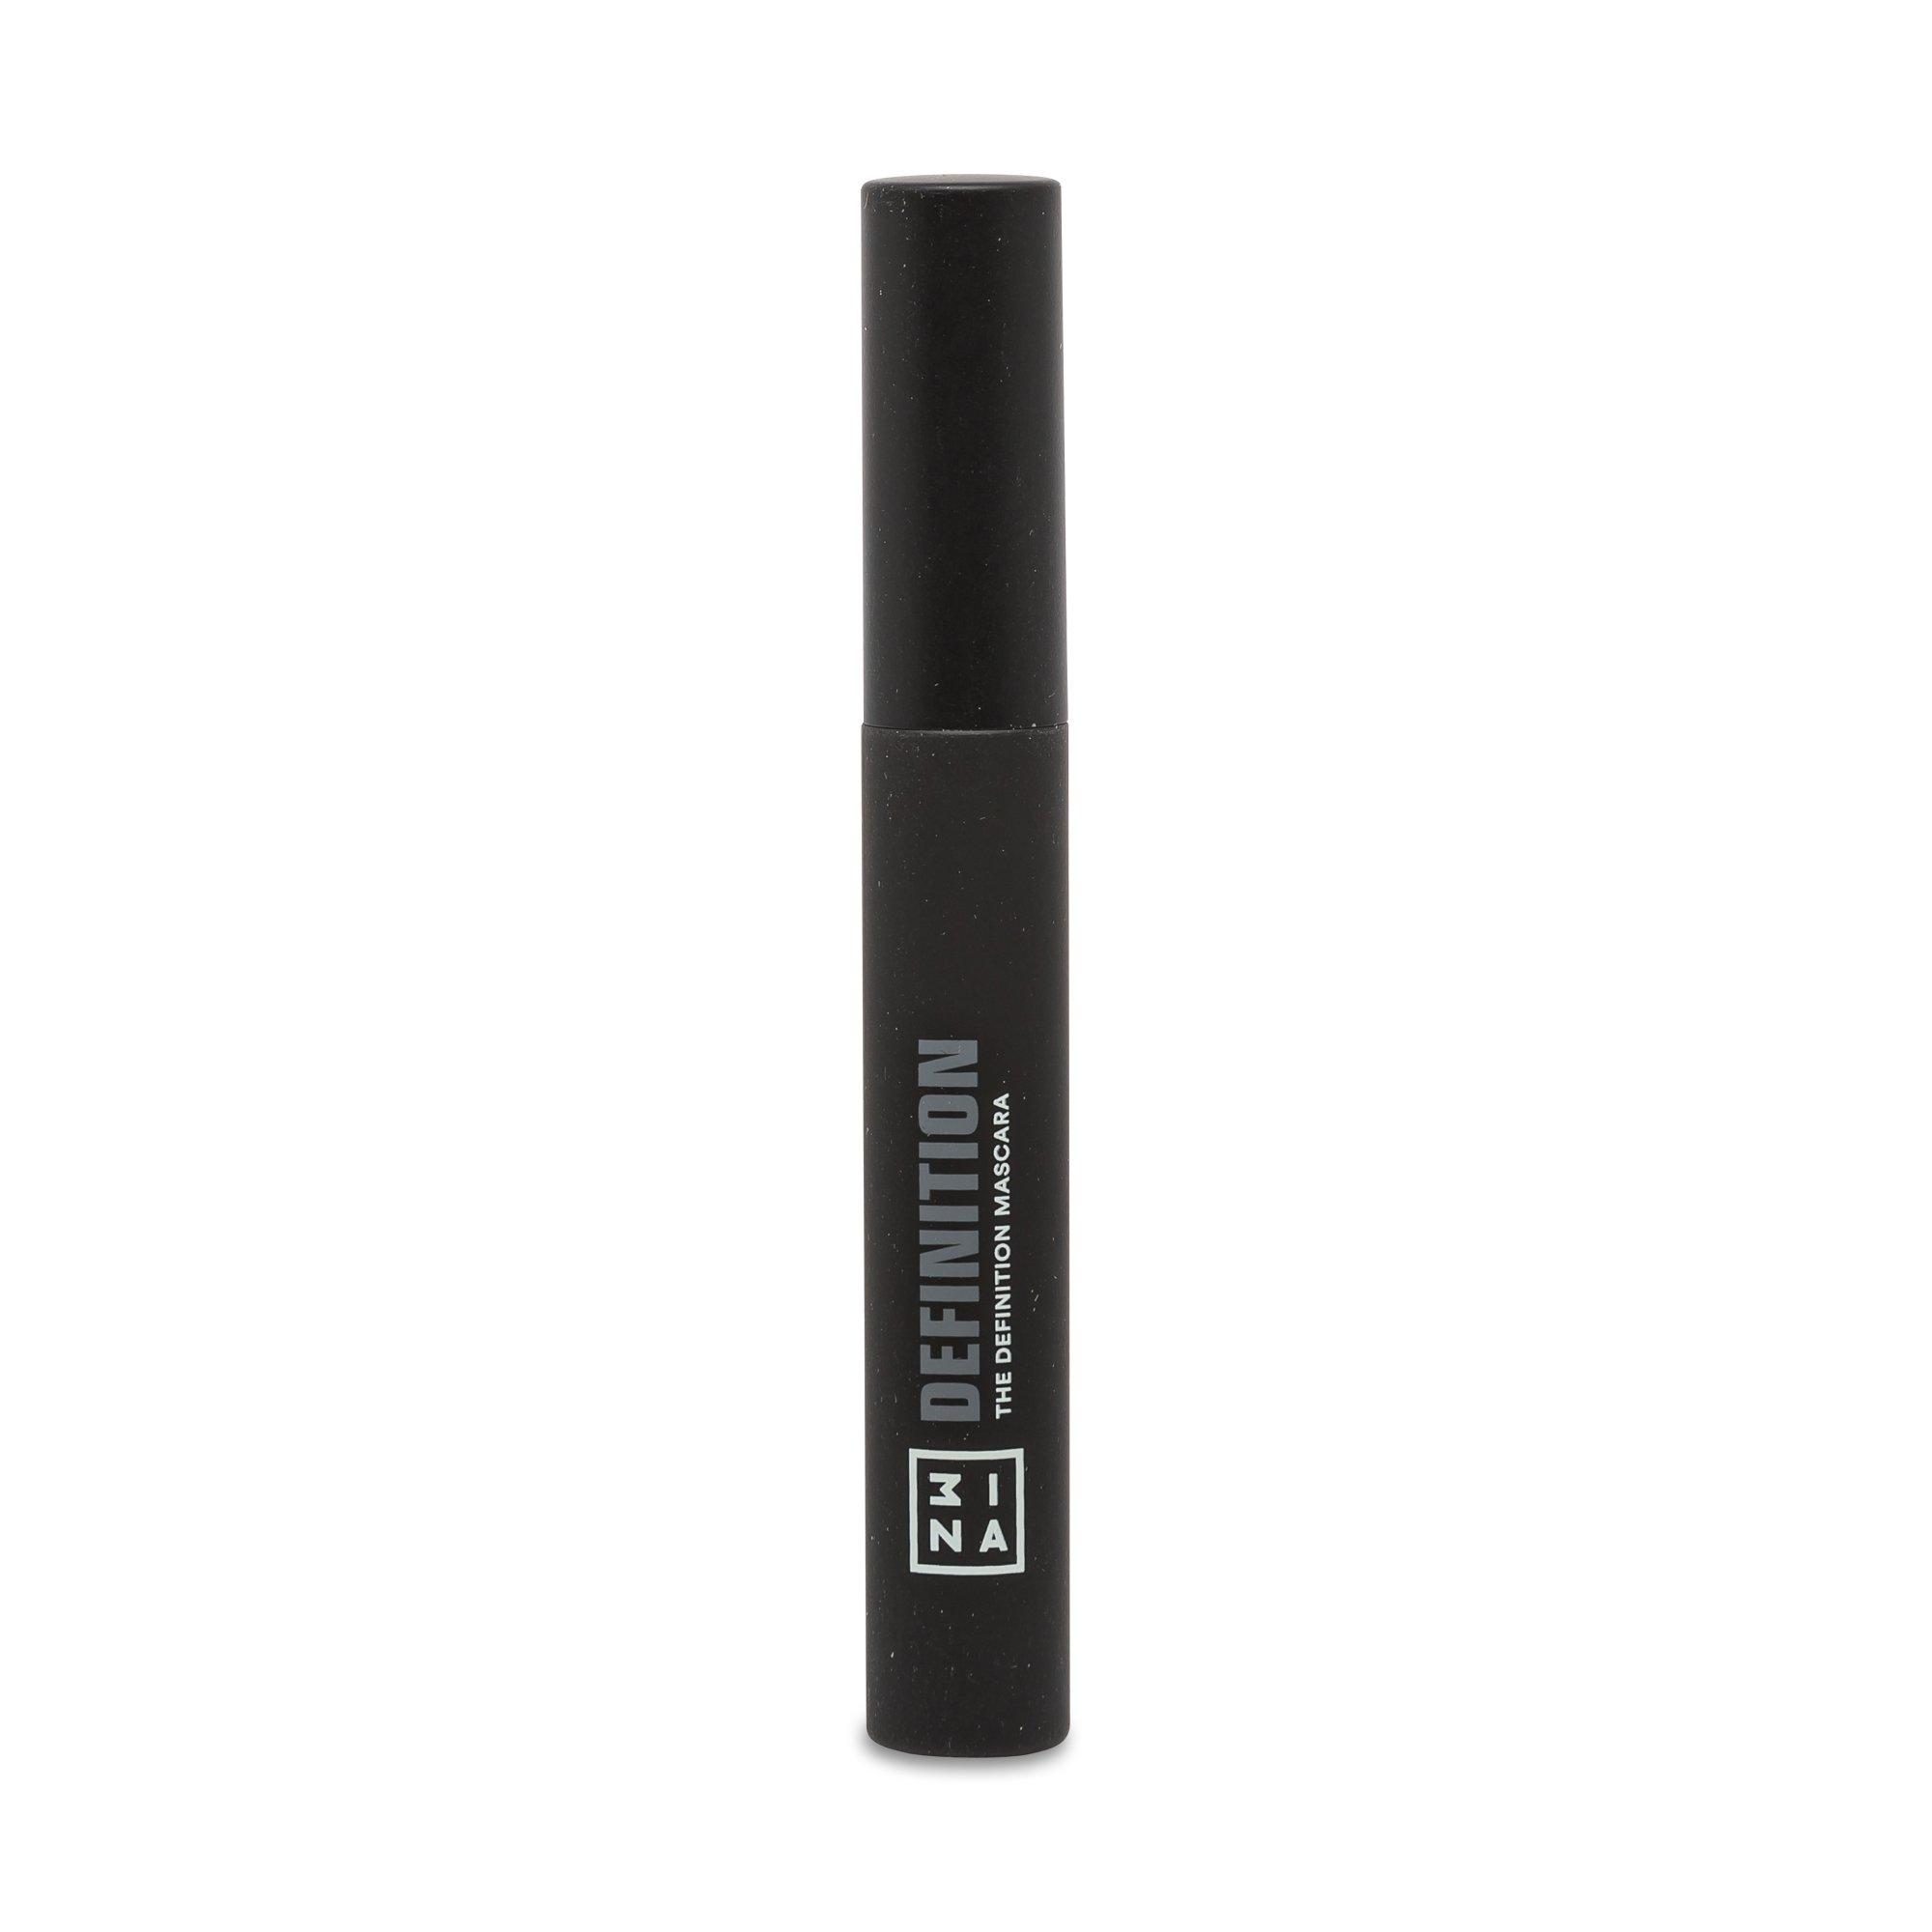 Image of 3INA The Definition Mascara - 9.5ml